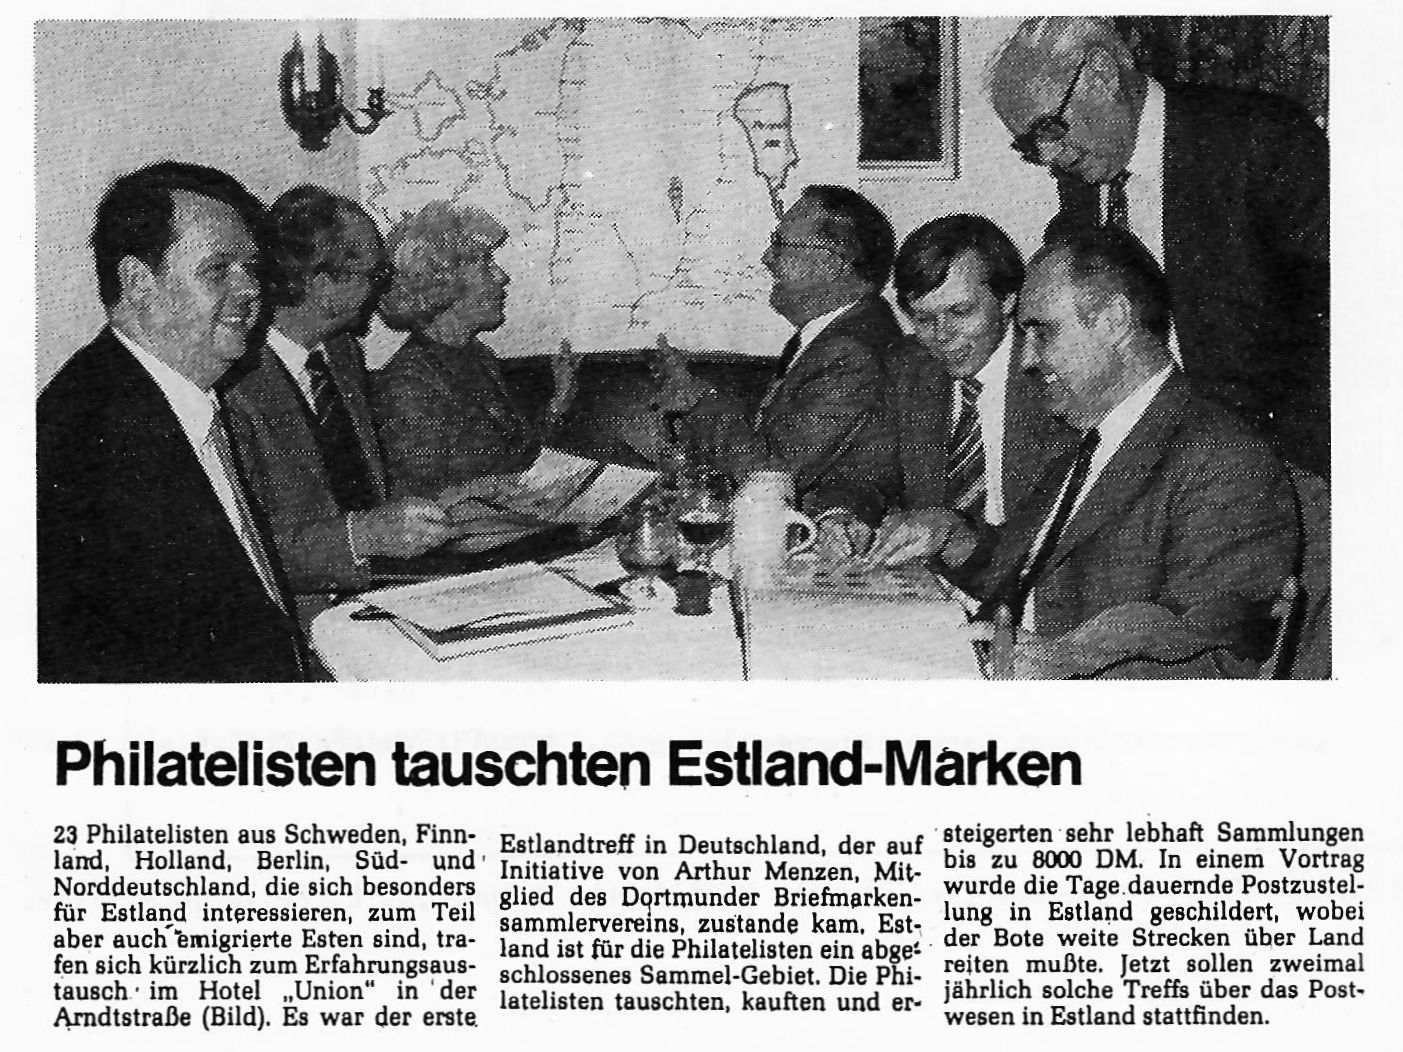 Newspaper report of the Ruhr-Nachrichten No. 263 of 11.11.1981 about the first meeting of the Estonia philatelists in Dortmund. 